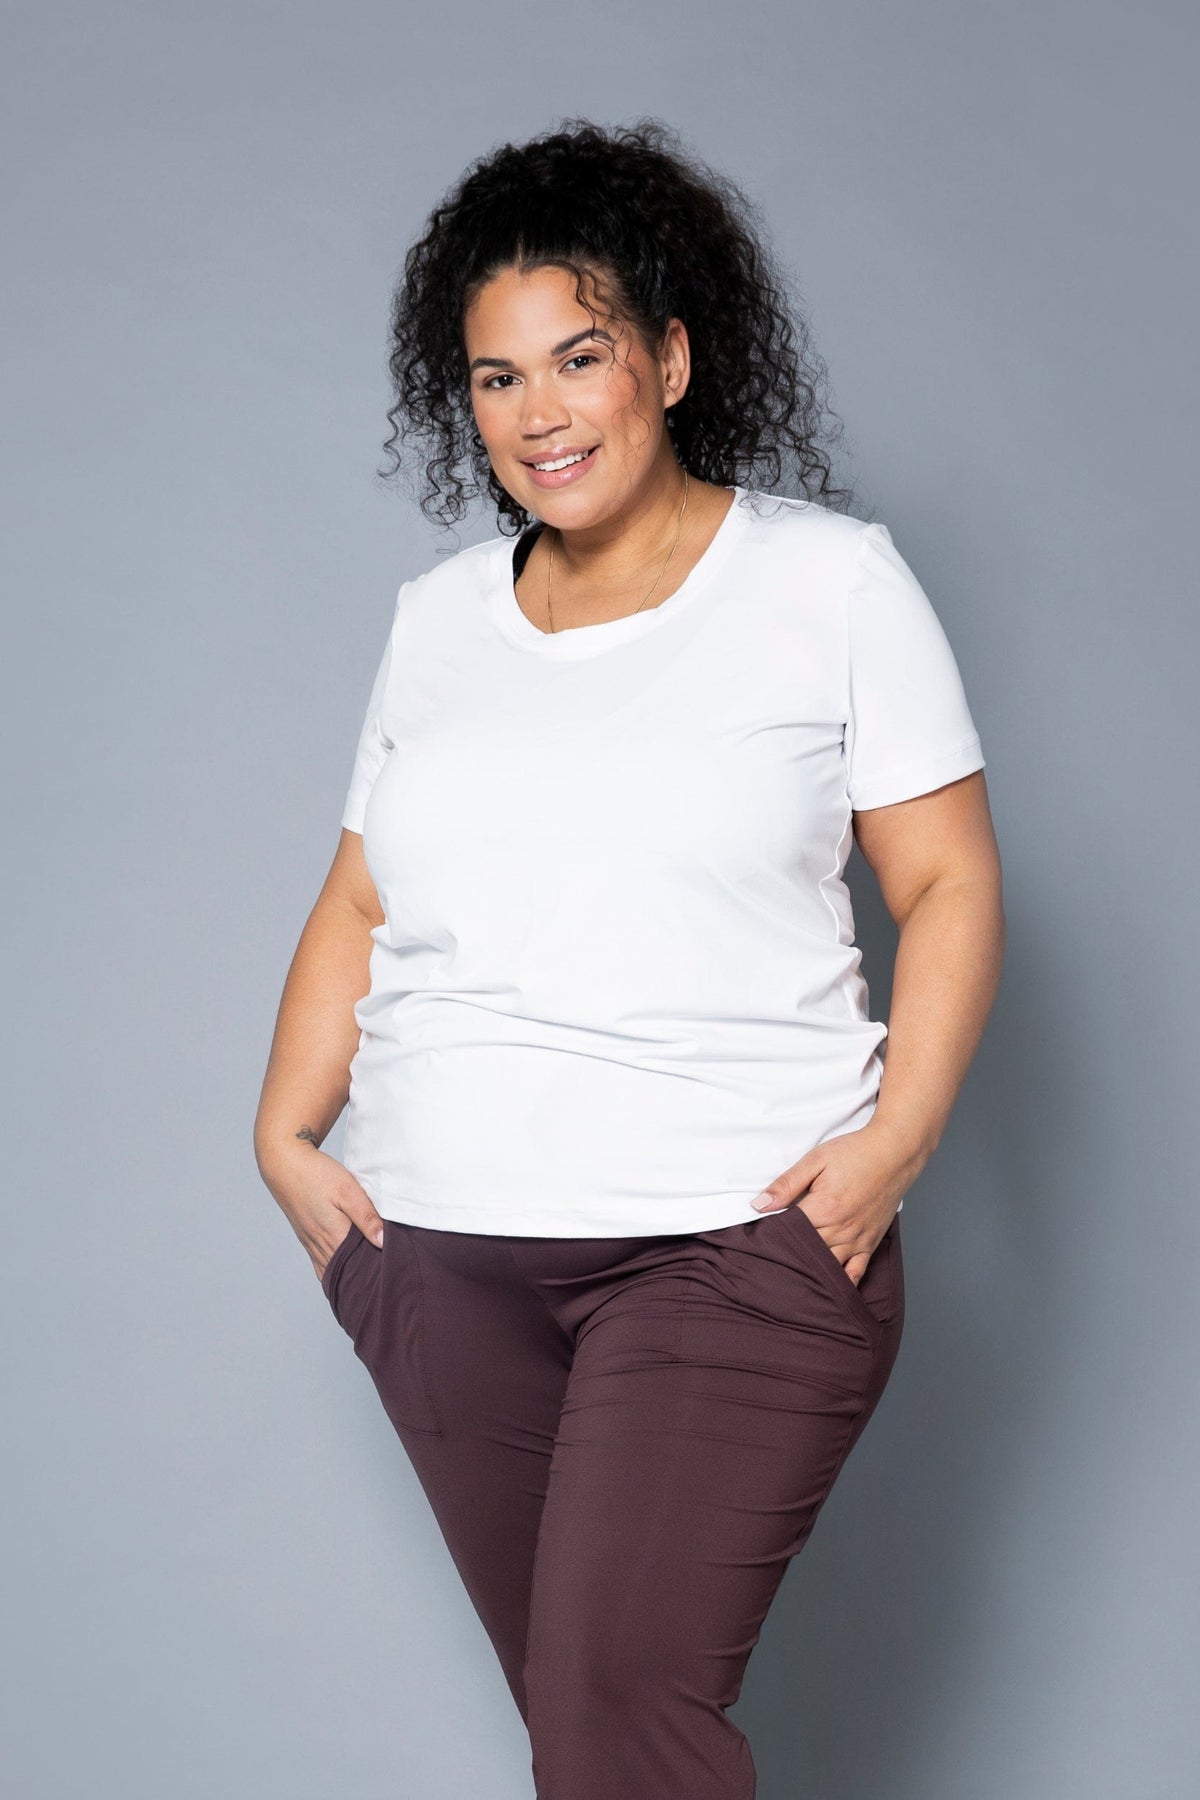 The Aglity - Short-sleeve t-shirt biodegradable fabric⎮ Plus Size